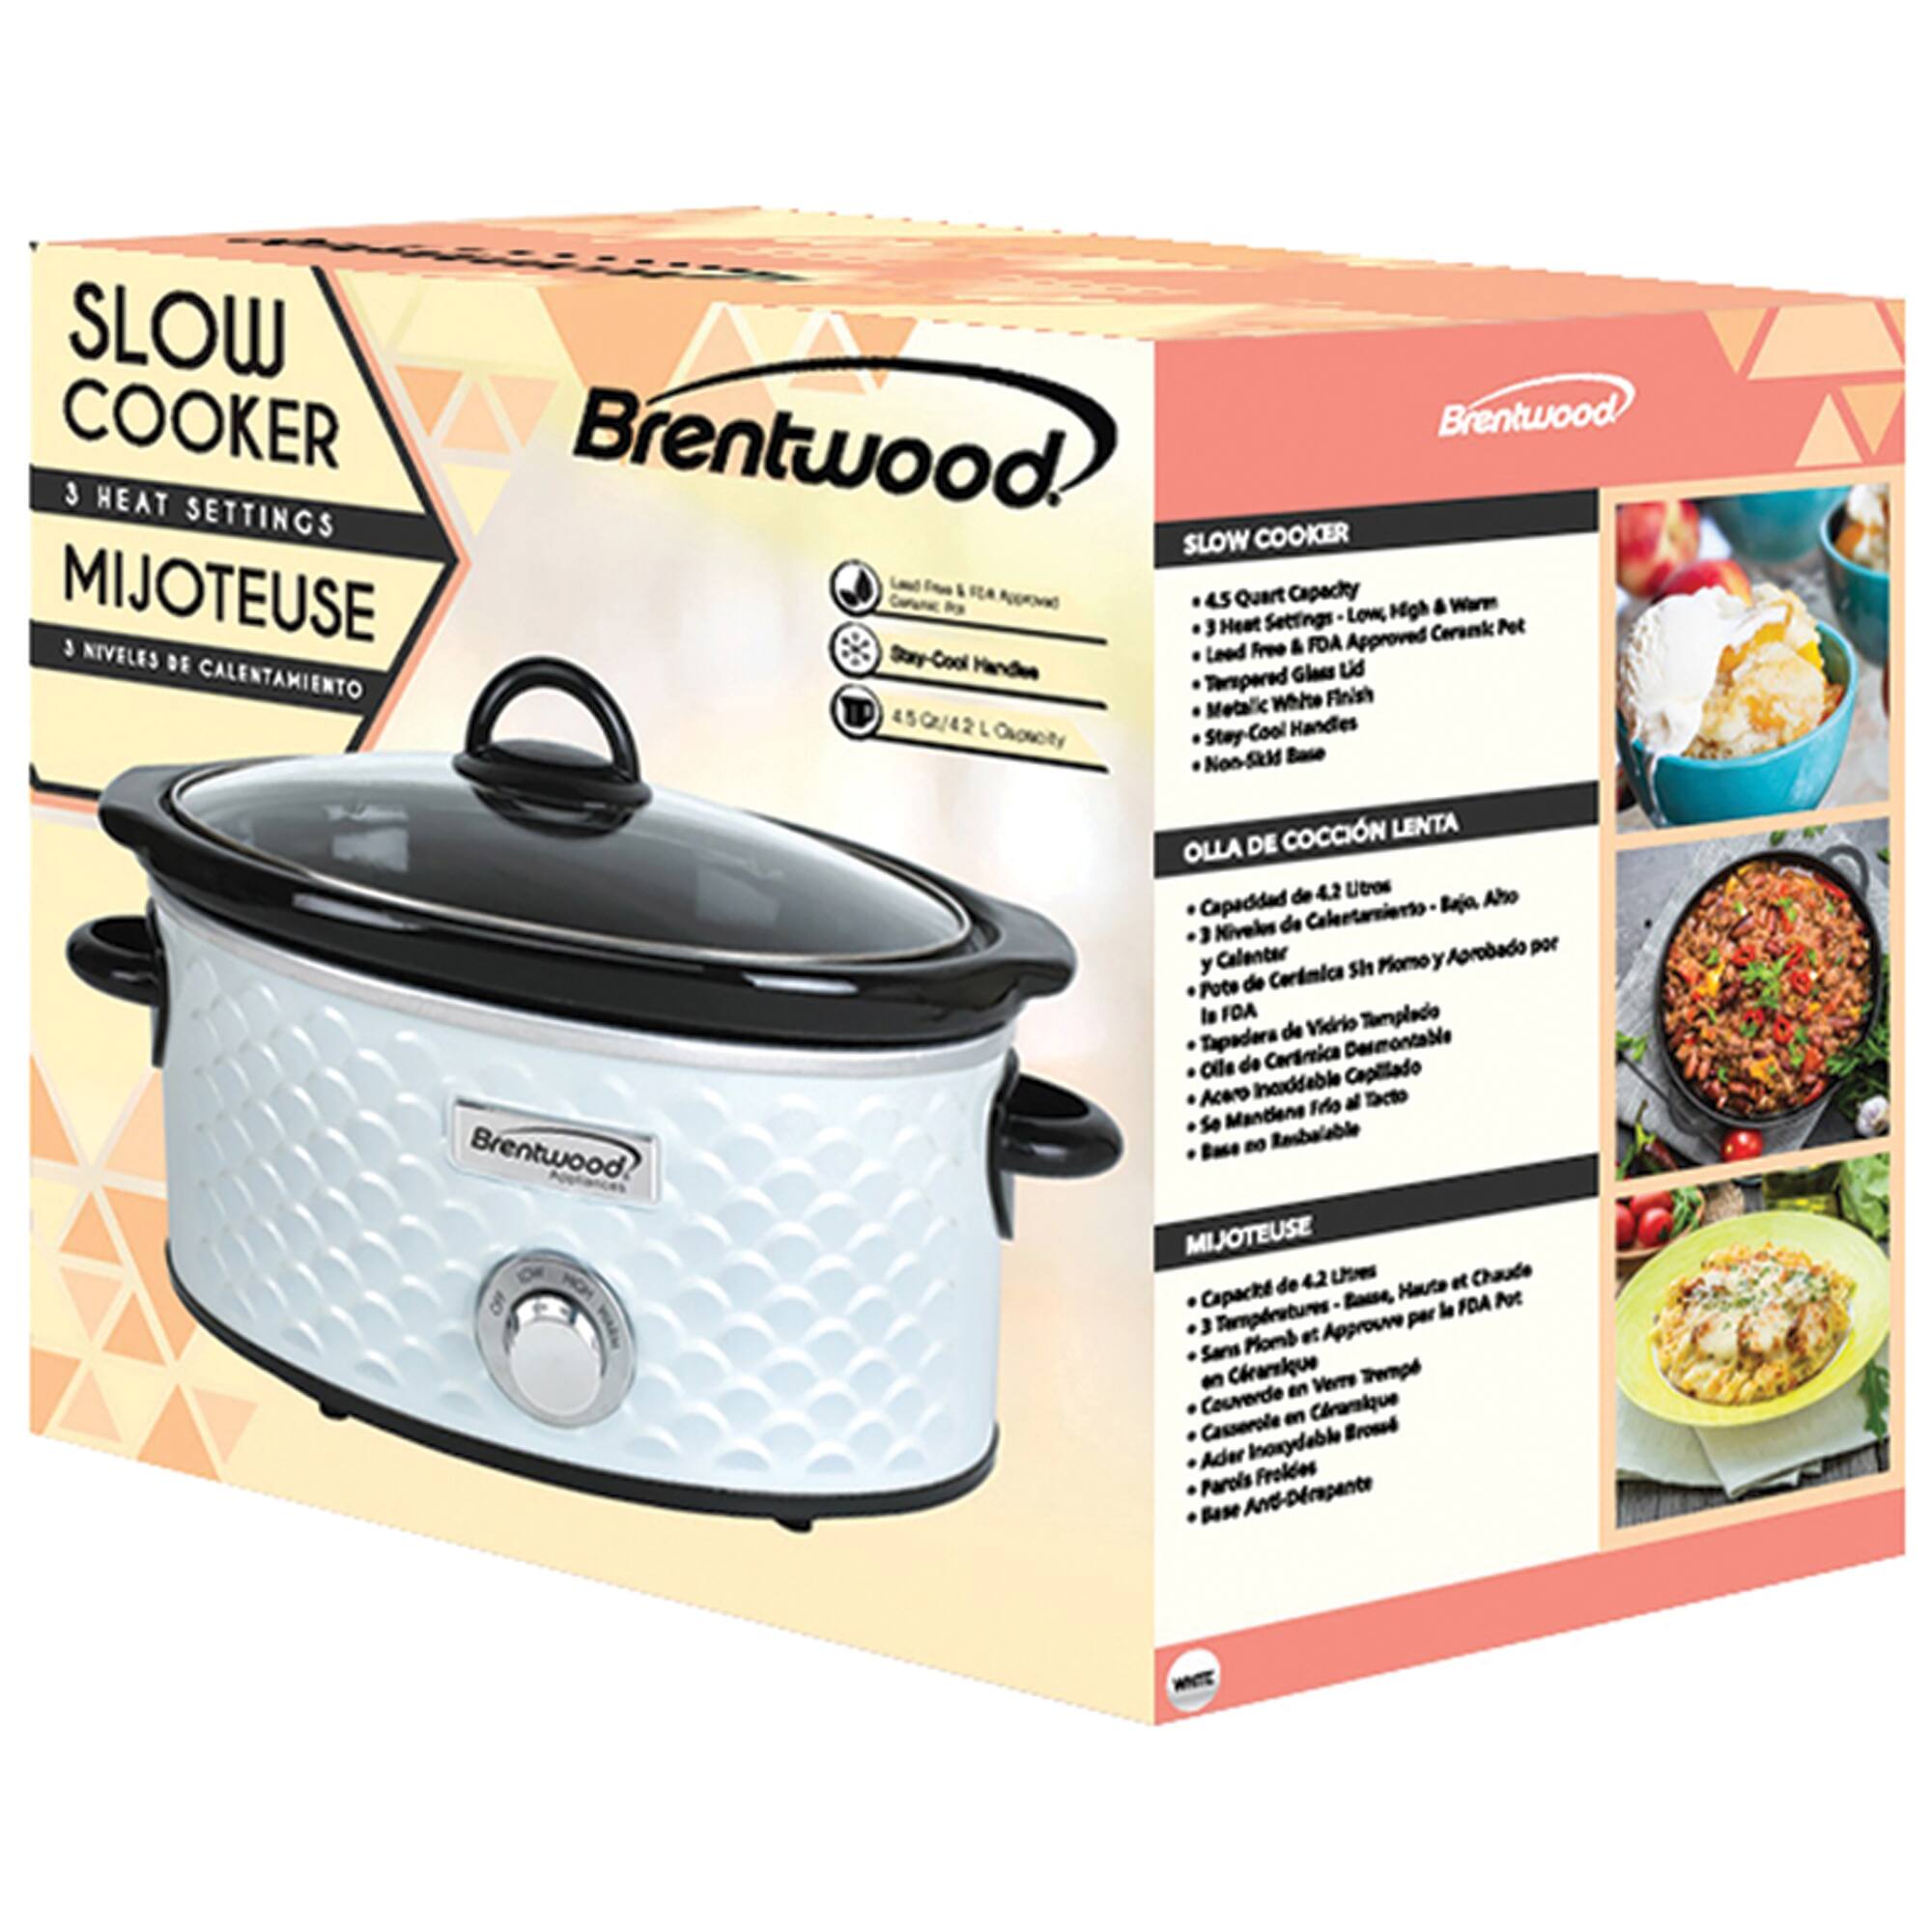 Brentwood Slow Cooker